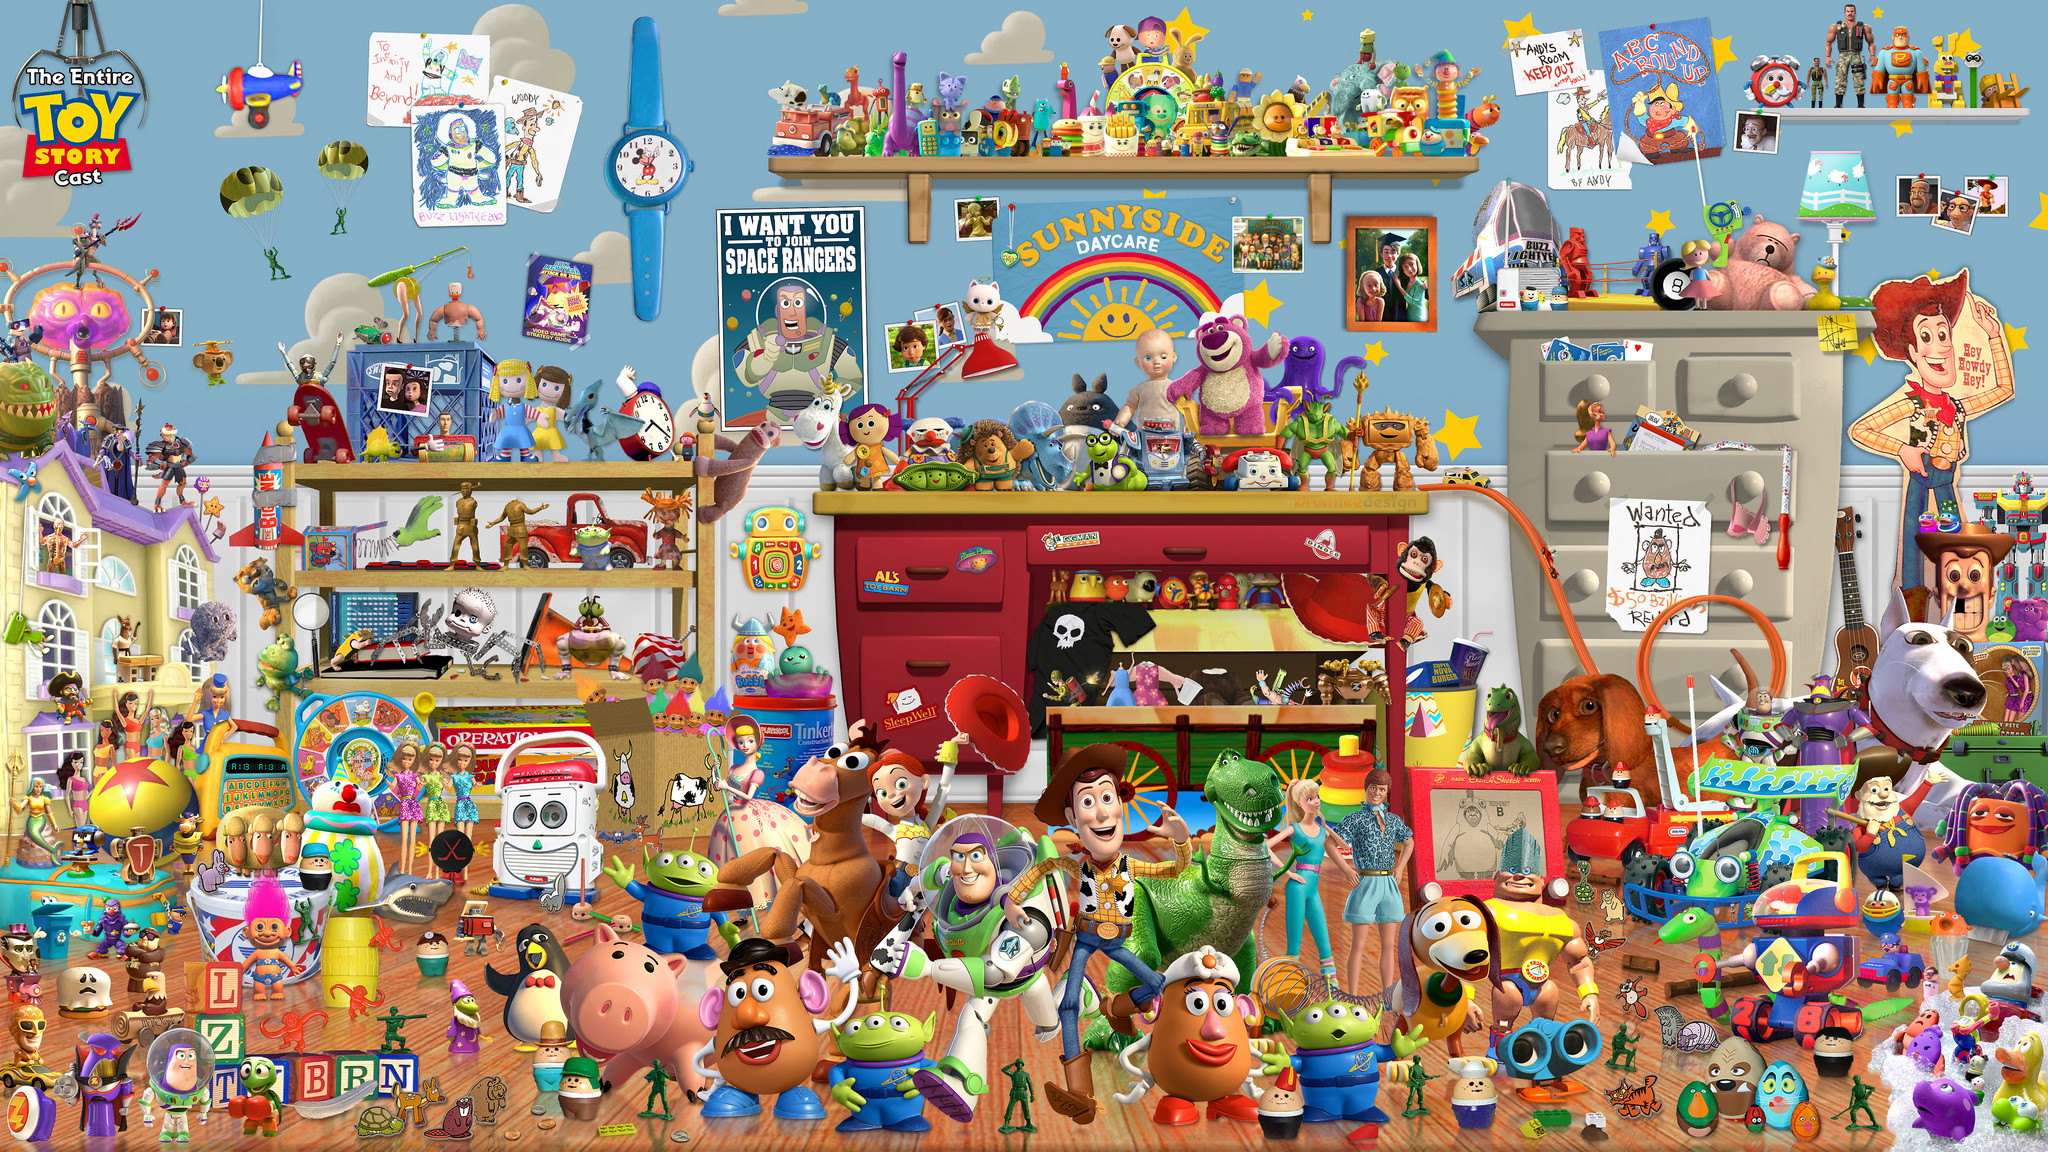 2048x1152 The ENTIRE Toy Story Cast Wallpaper